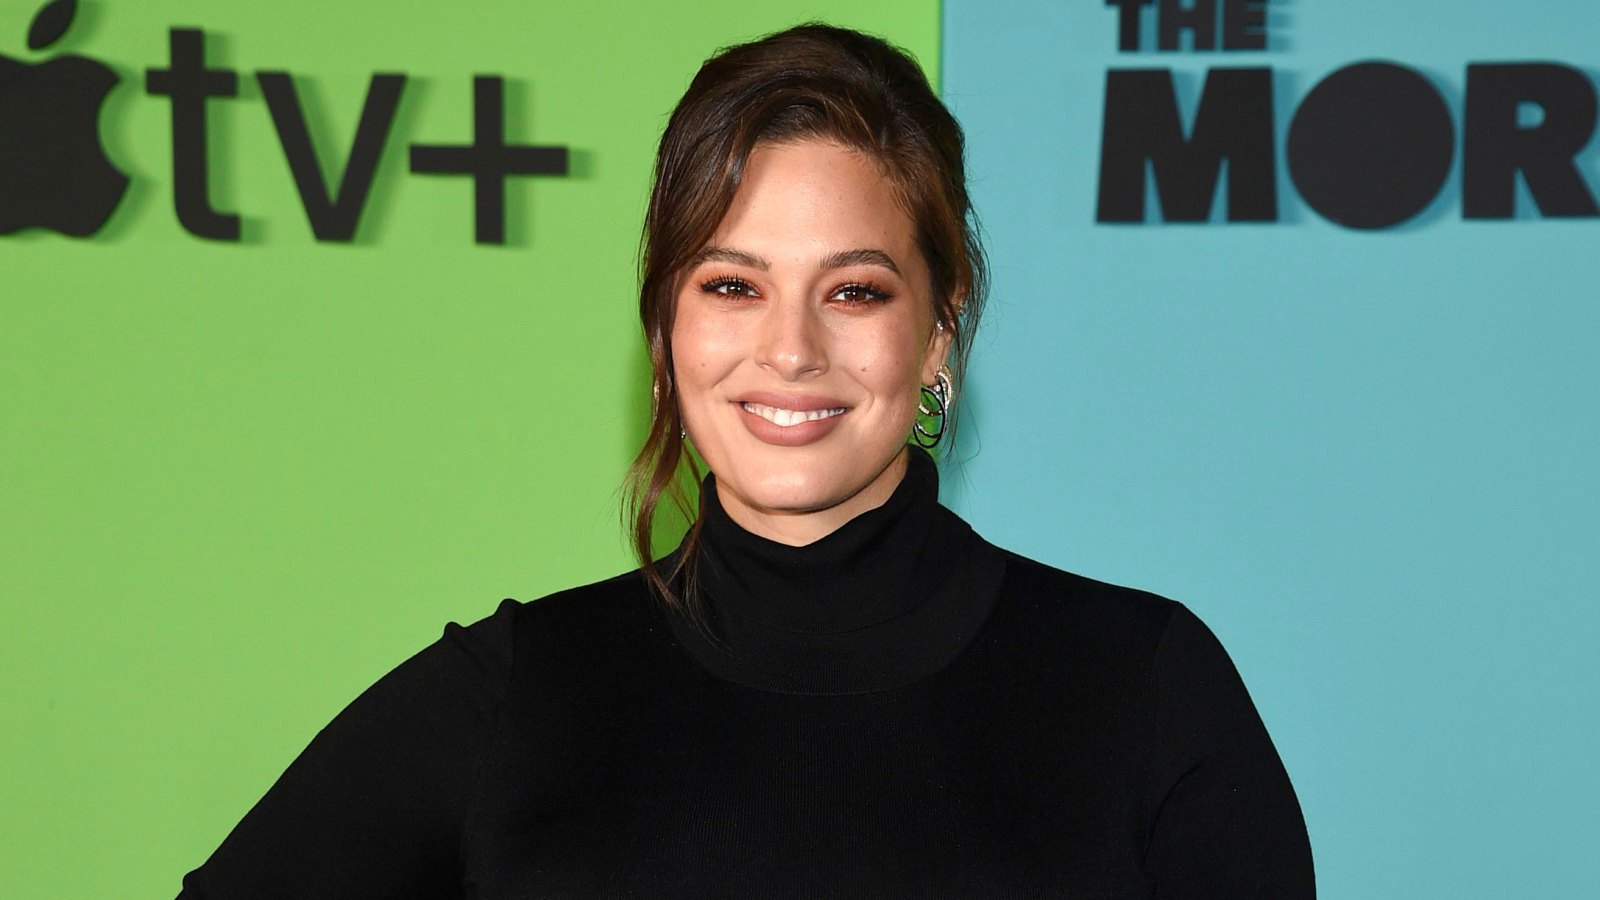 Ashley Graham Is So Relatable as She Jumps to Zip Up Her Jeans While Listening to Beyonce